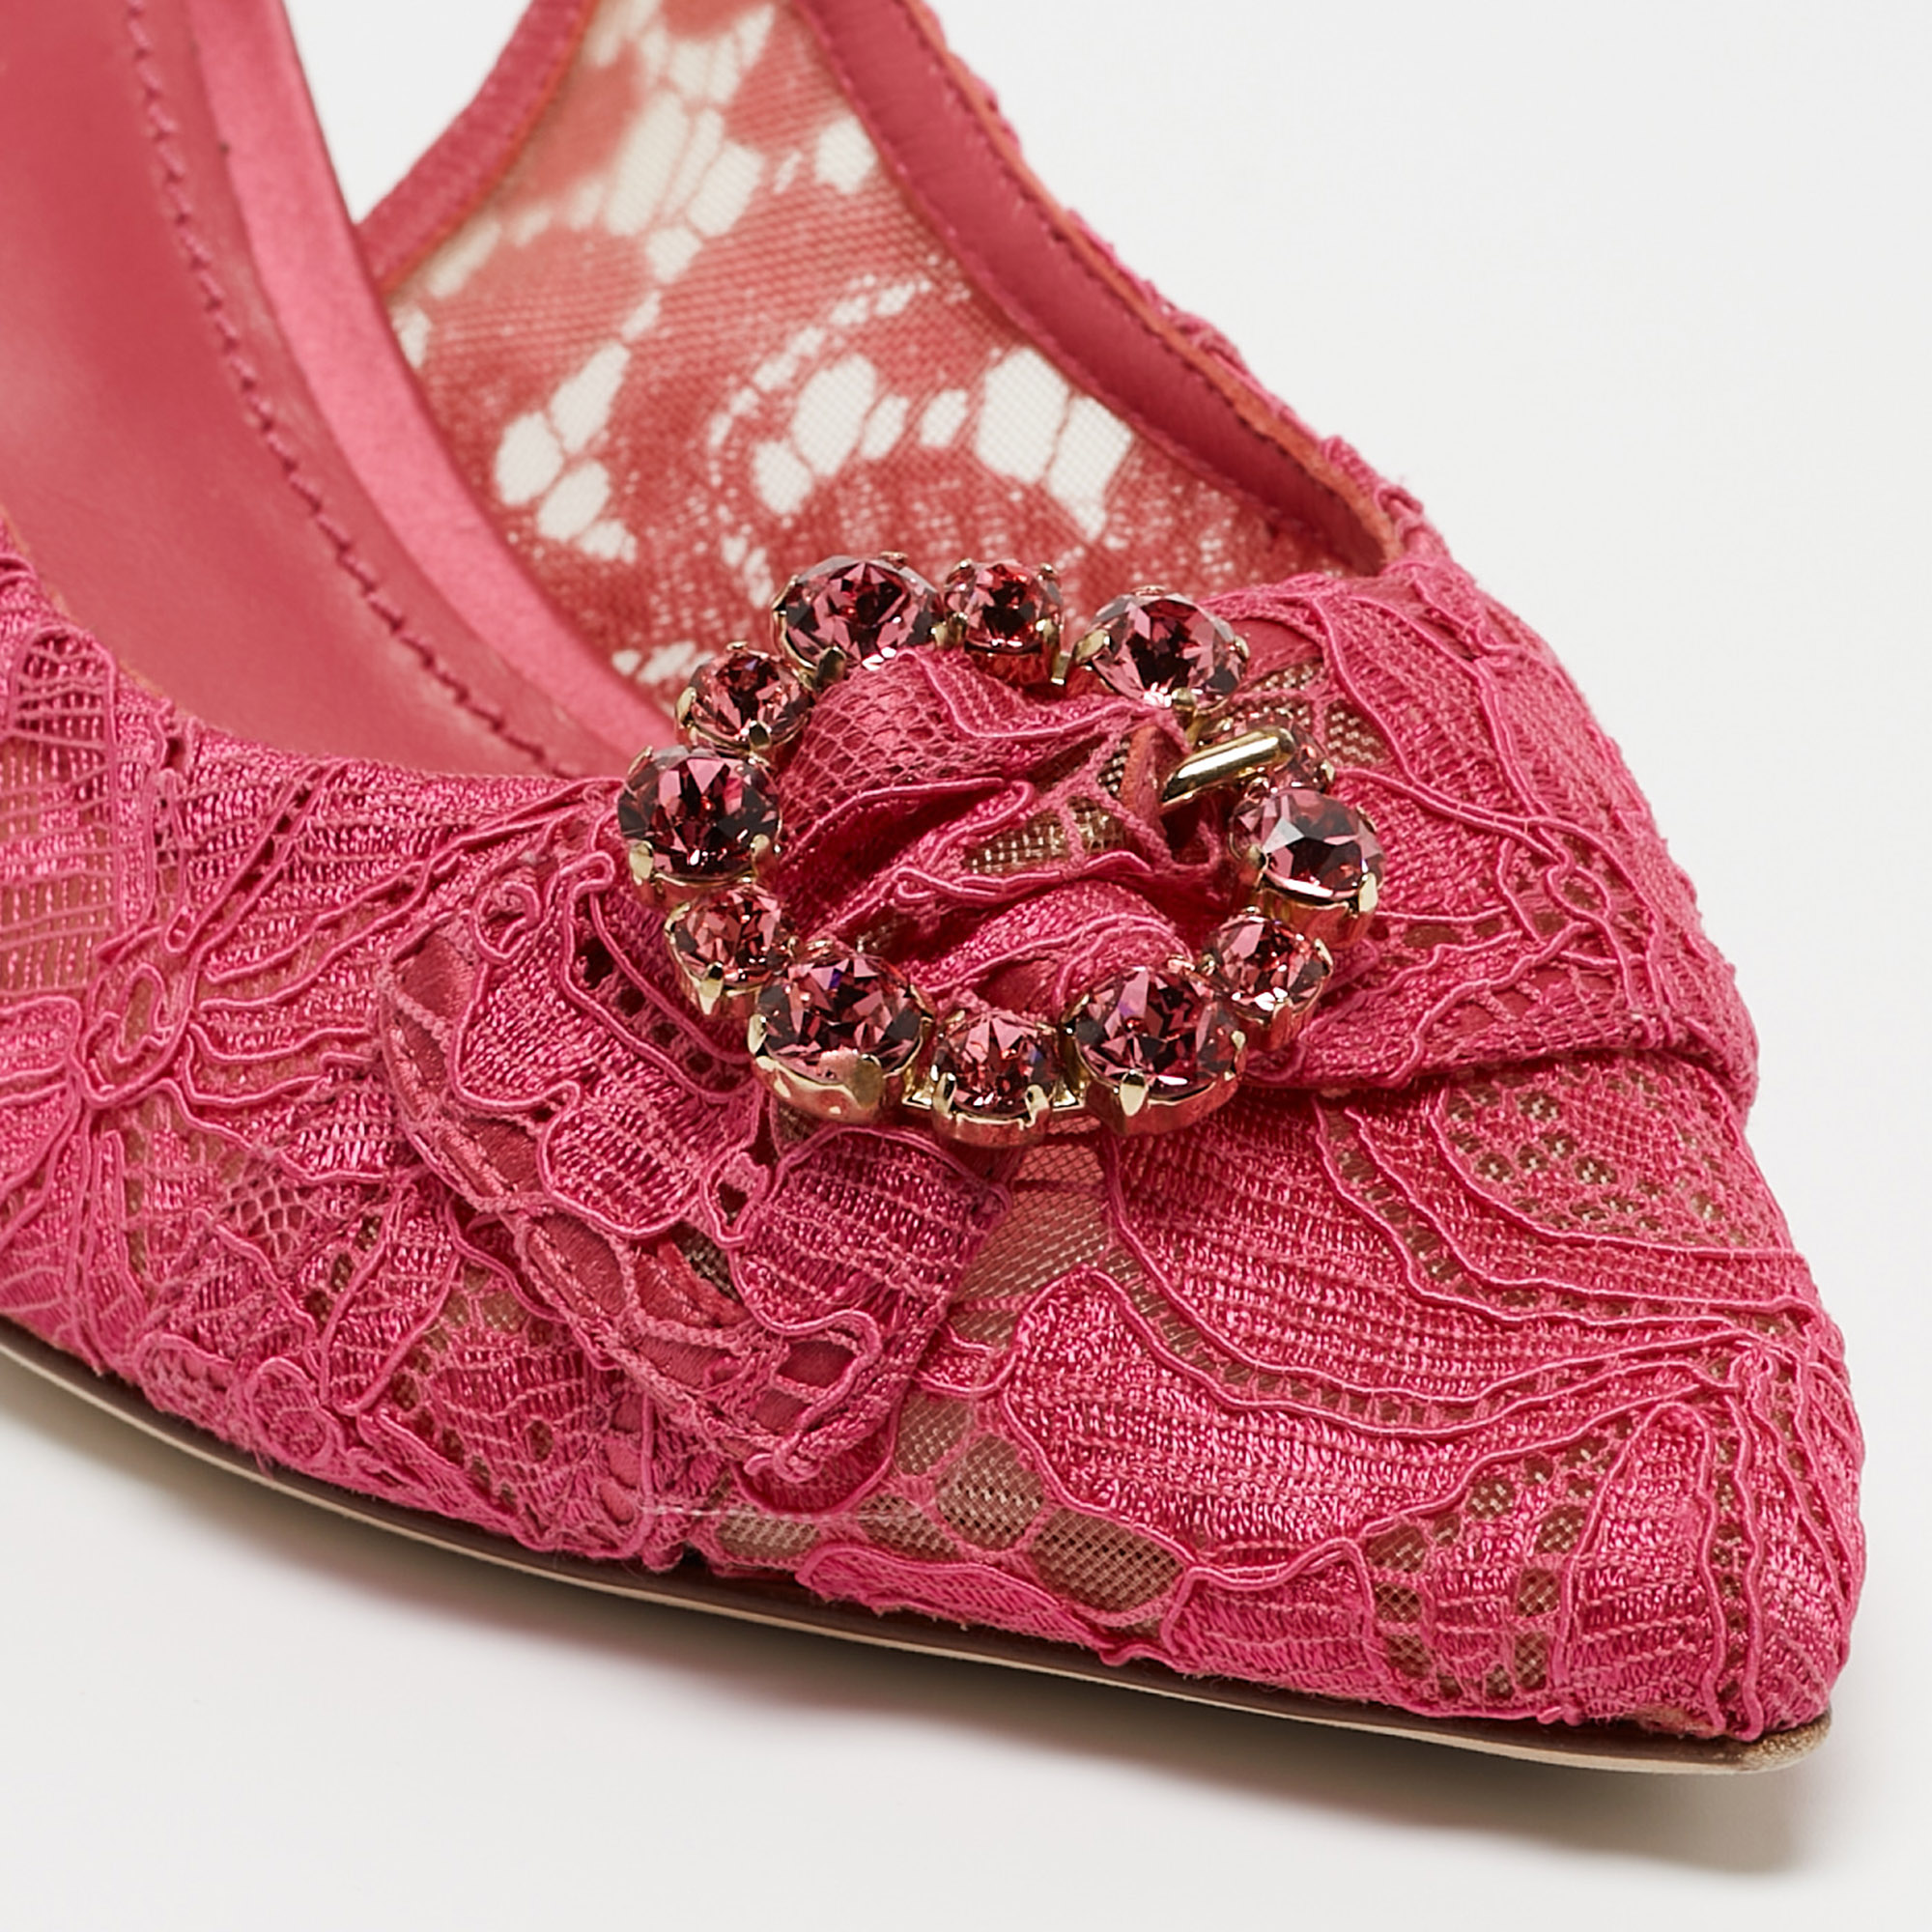 Dolce & Gabbana Pink Lace And Mesh Slingback Pumps Size 40